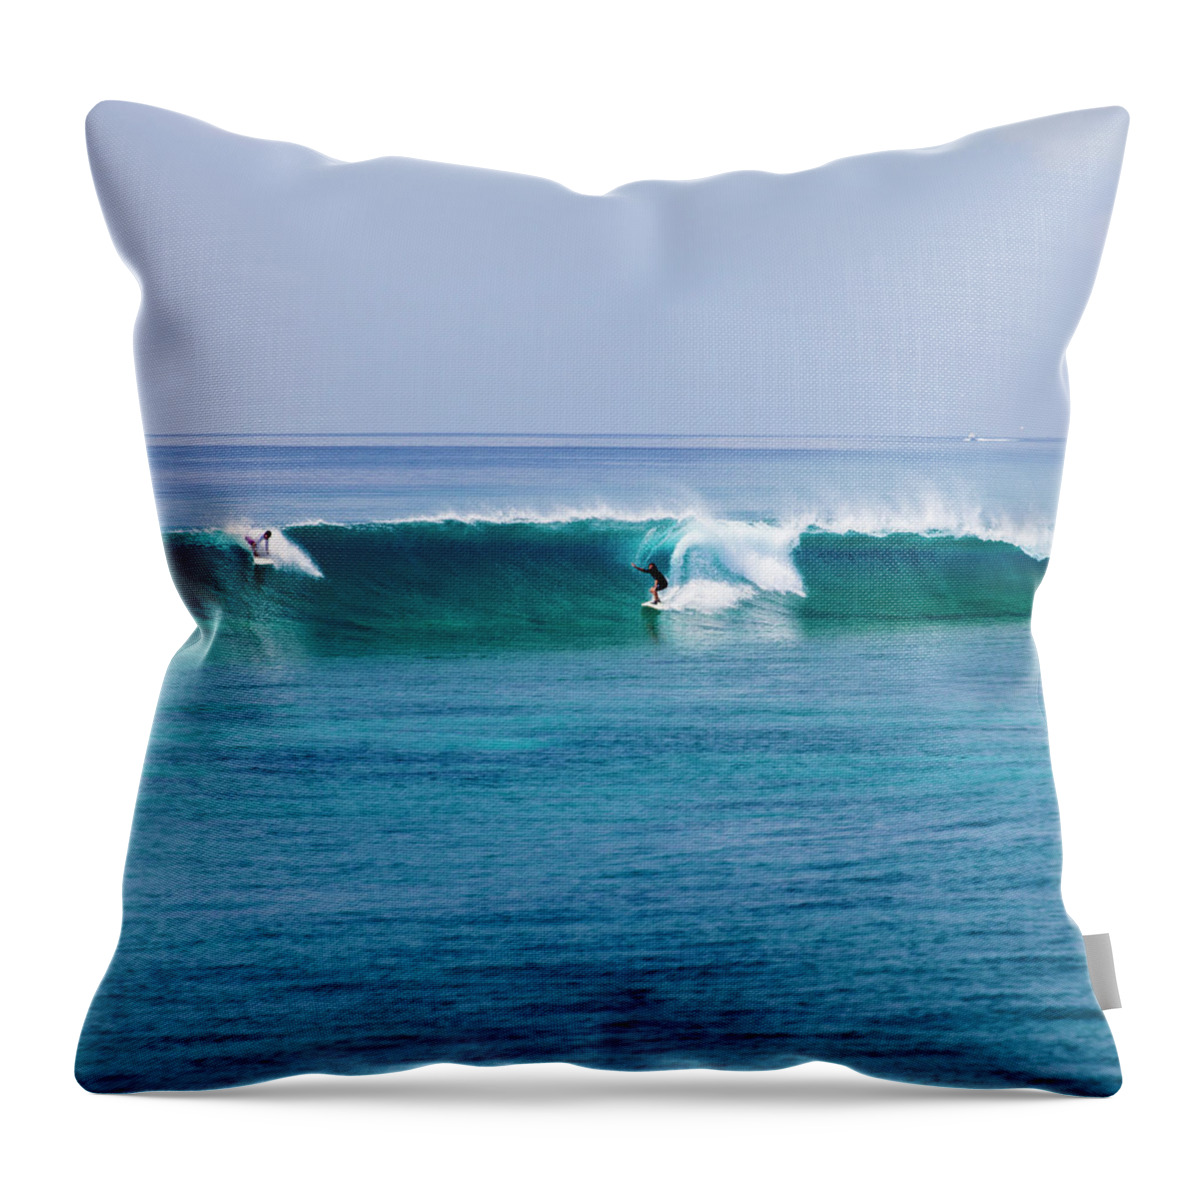 Recreational Pursuit Throw Pillow featuring the photograph Surfers Surfing A Wave by Subman